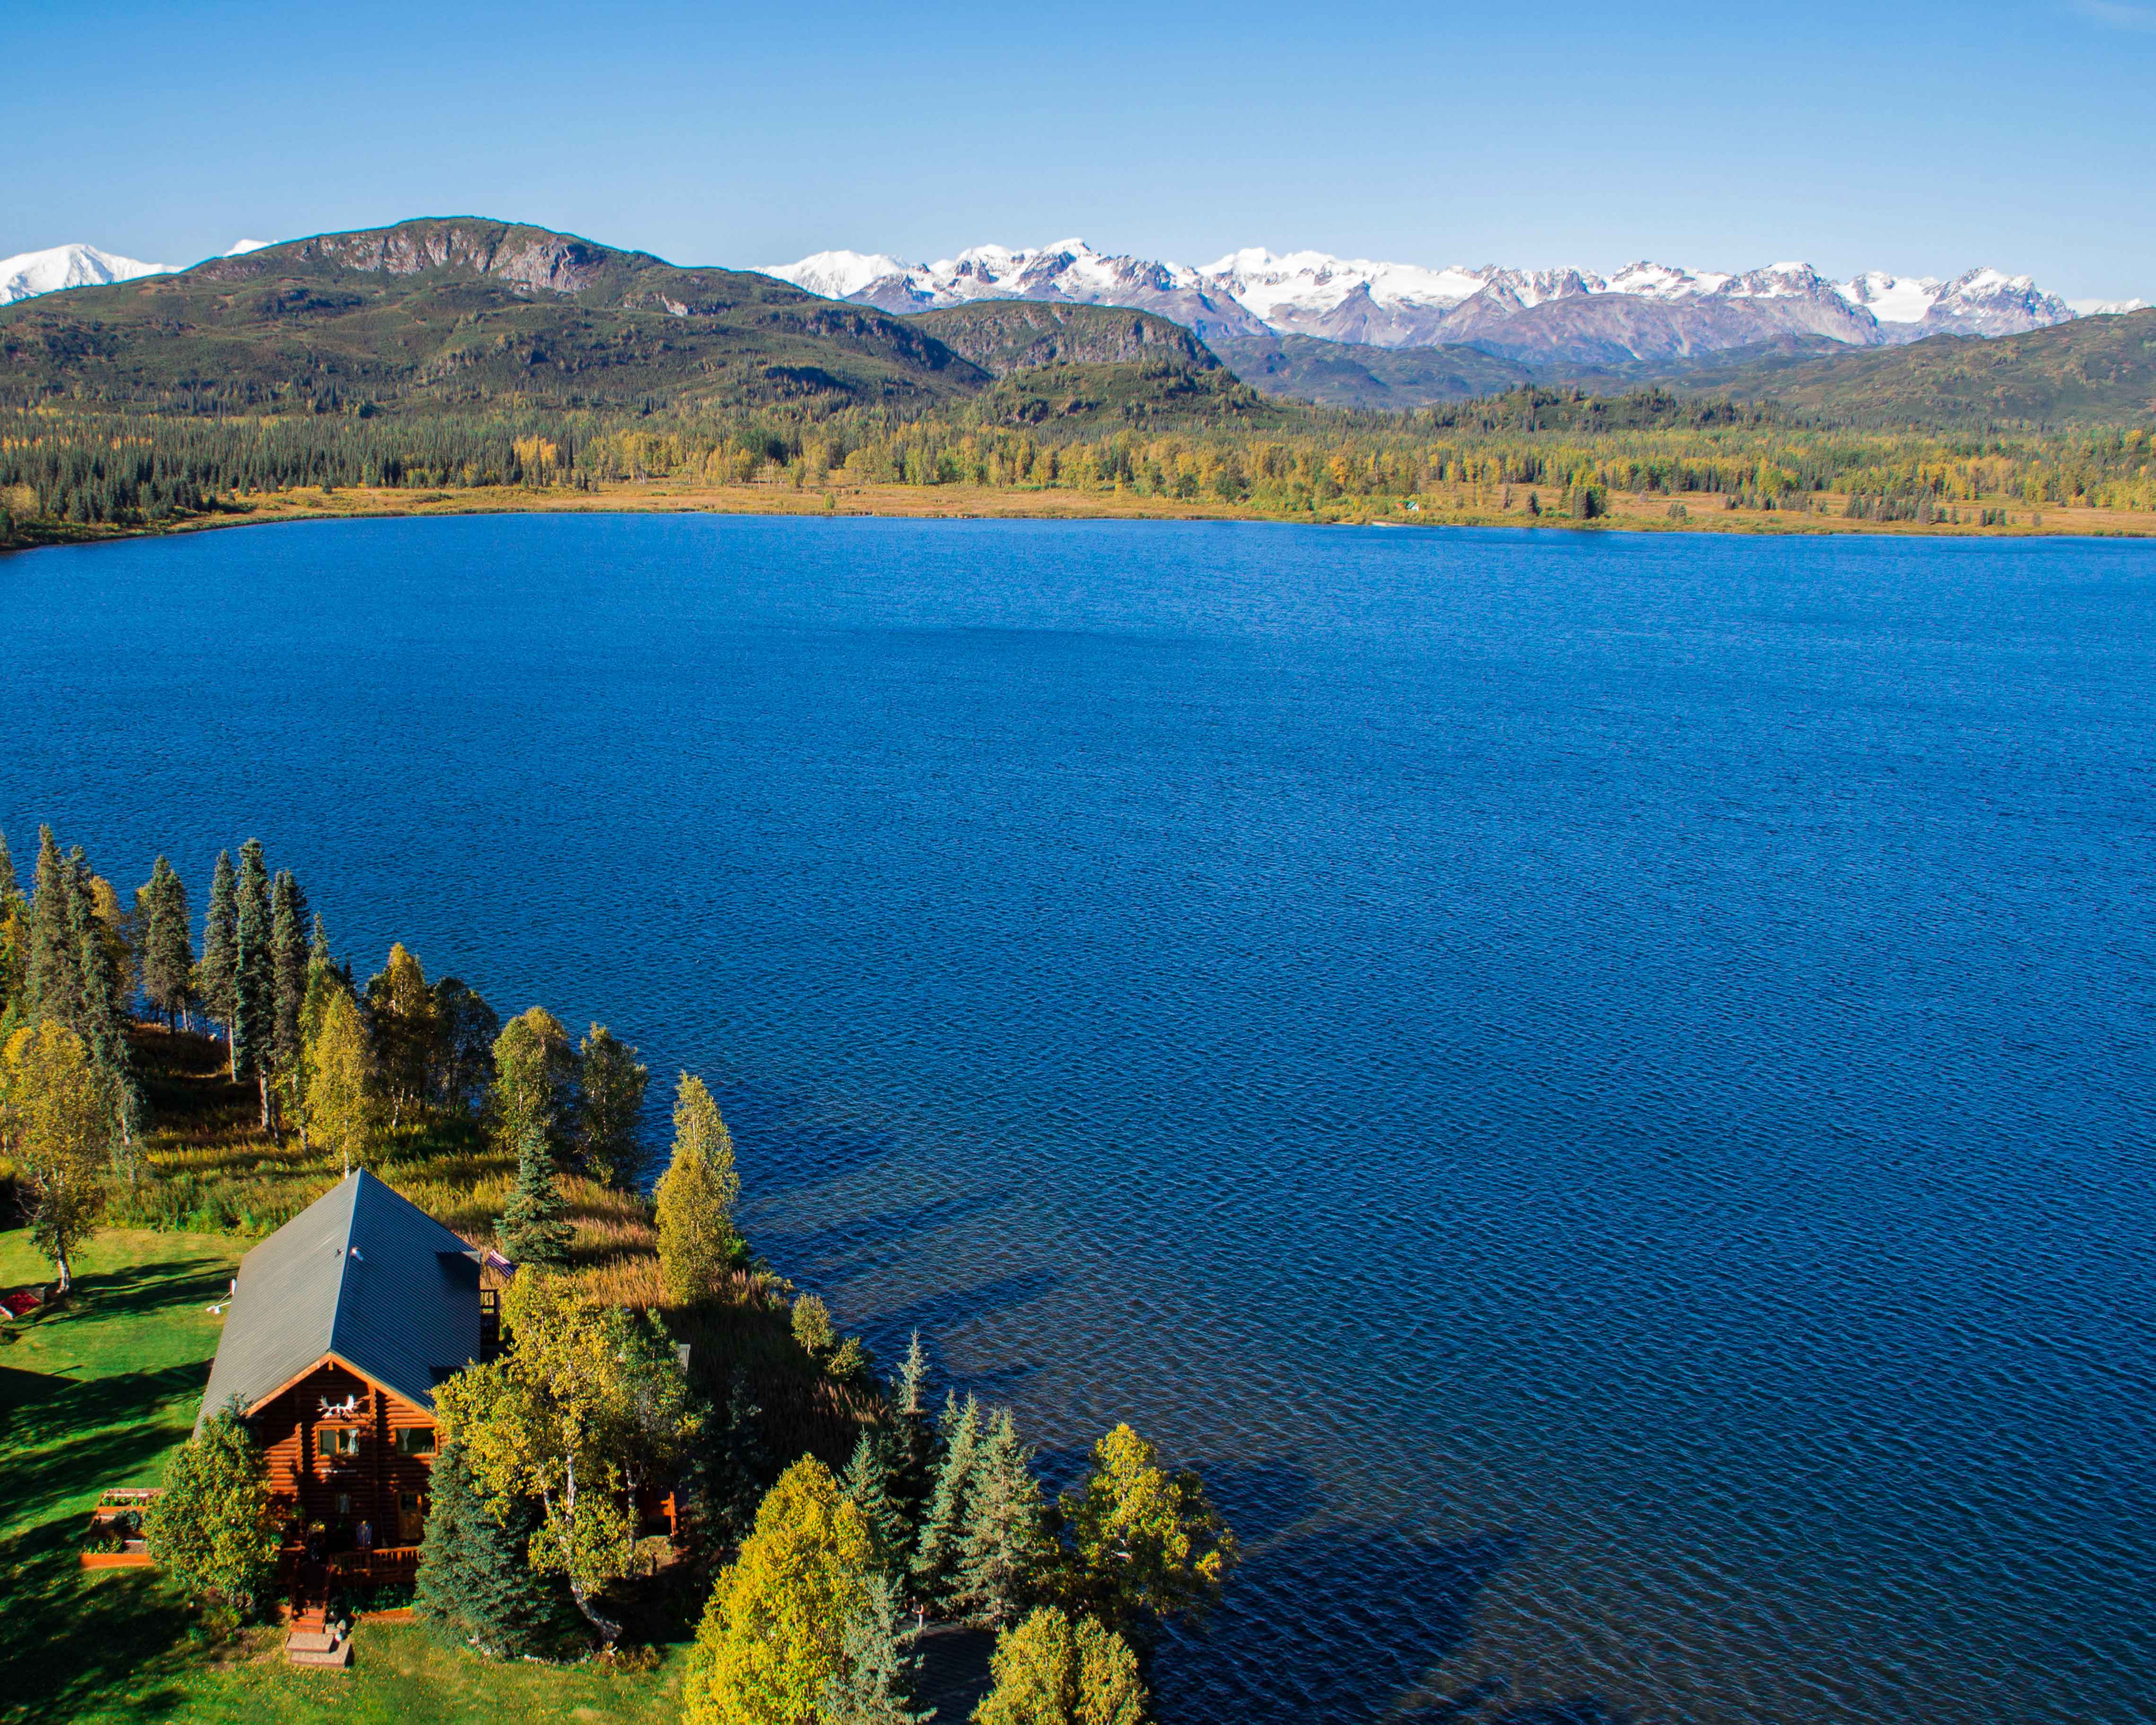 Finest lodges: lodge by the lake in Alaska with the mountains in the background.